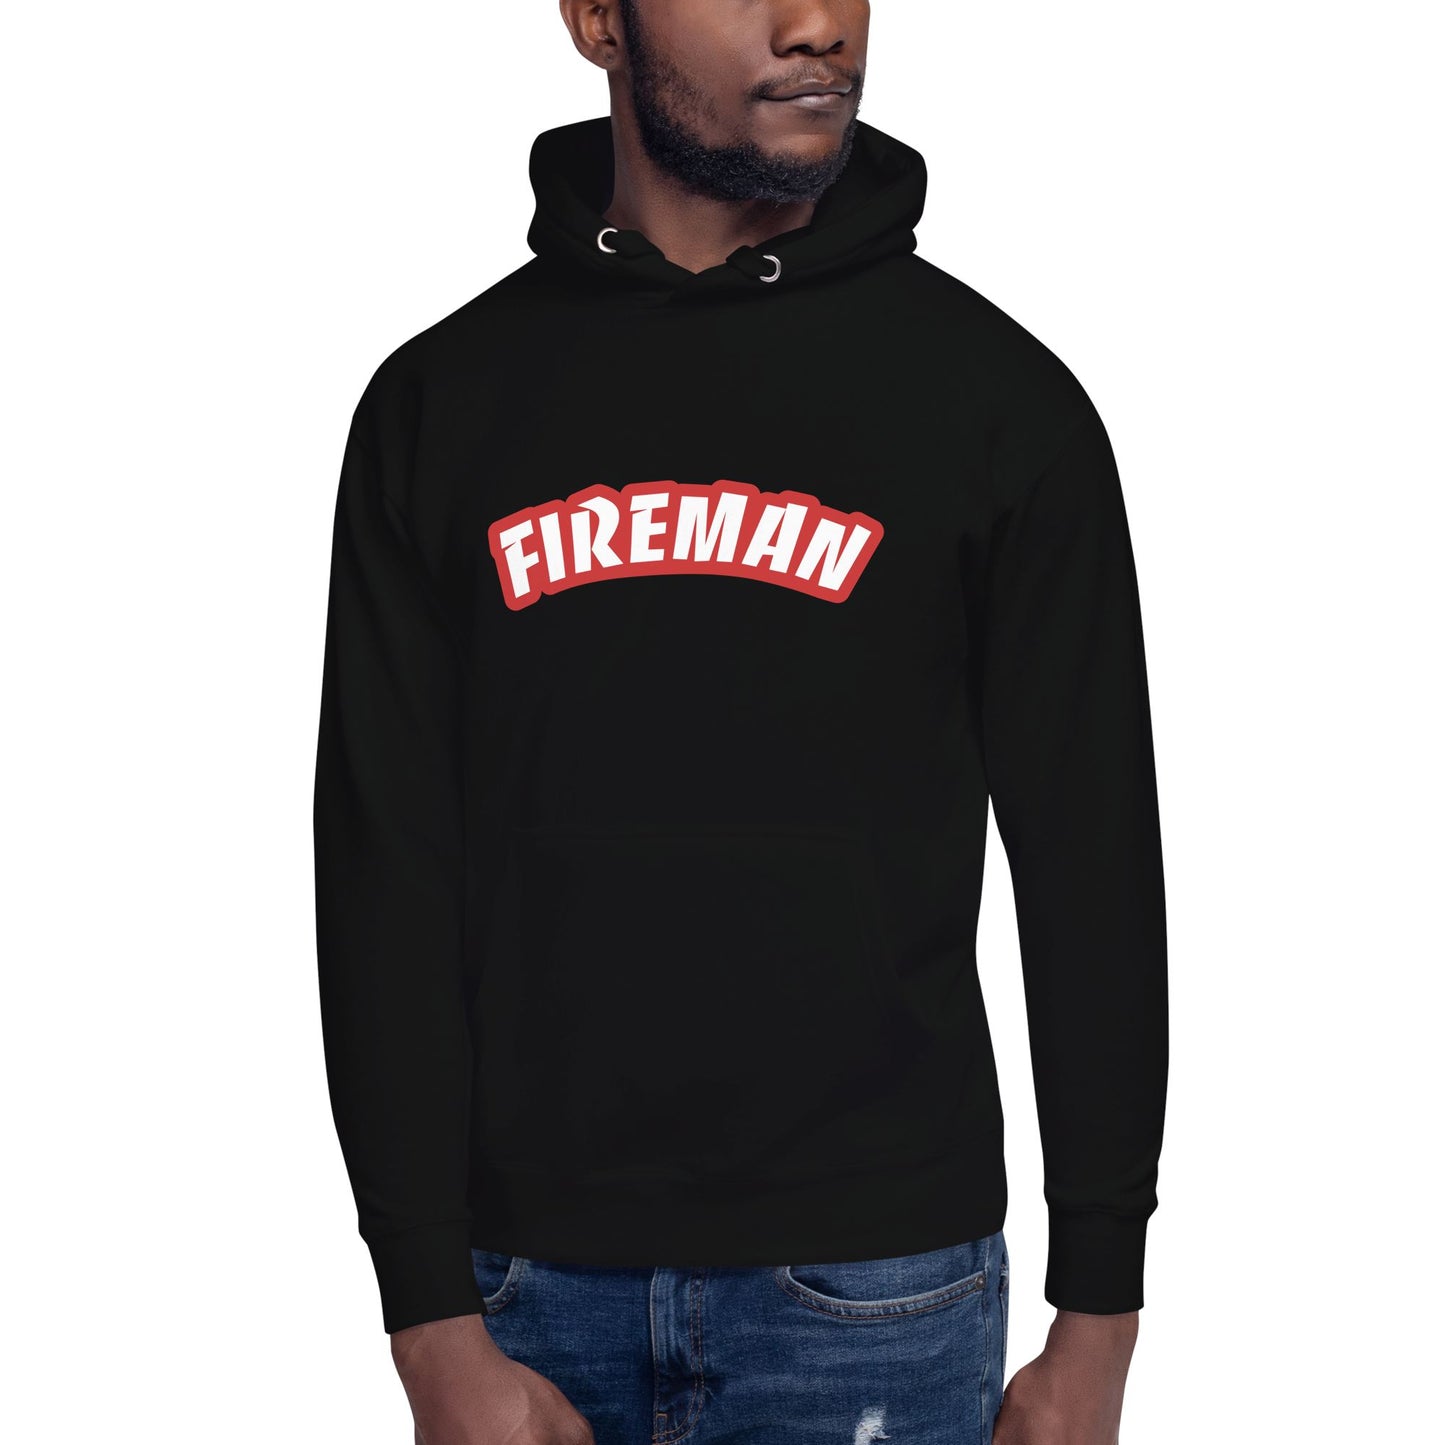 Man wearing Black hoodie with Fireman text on white background